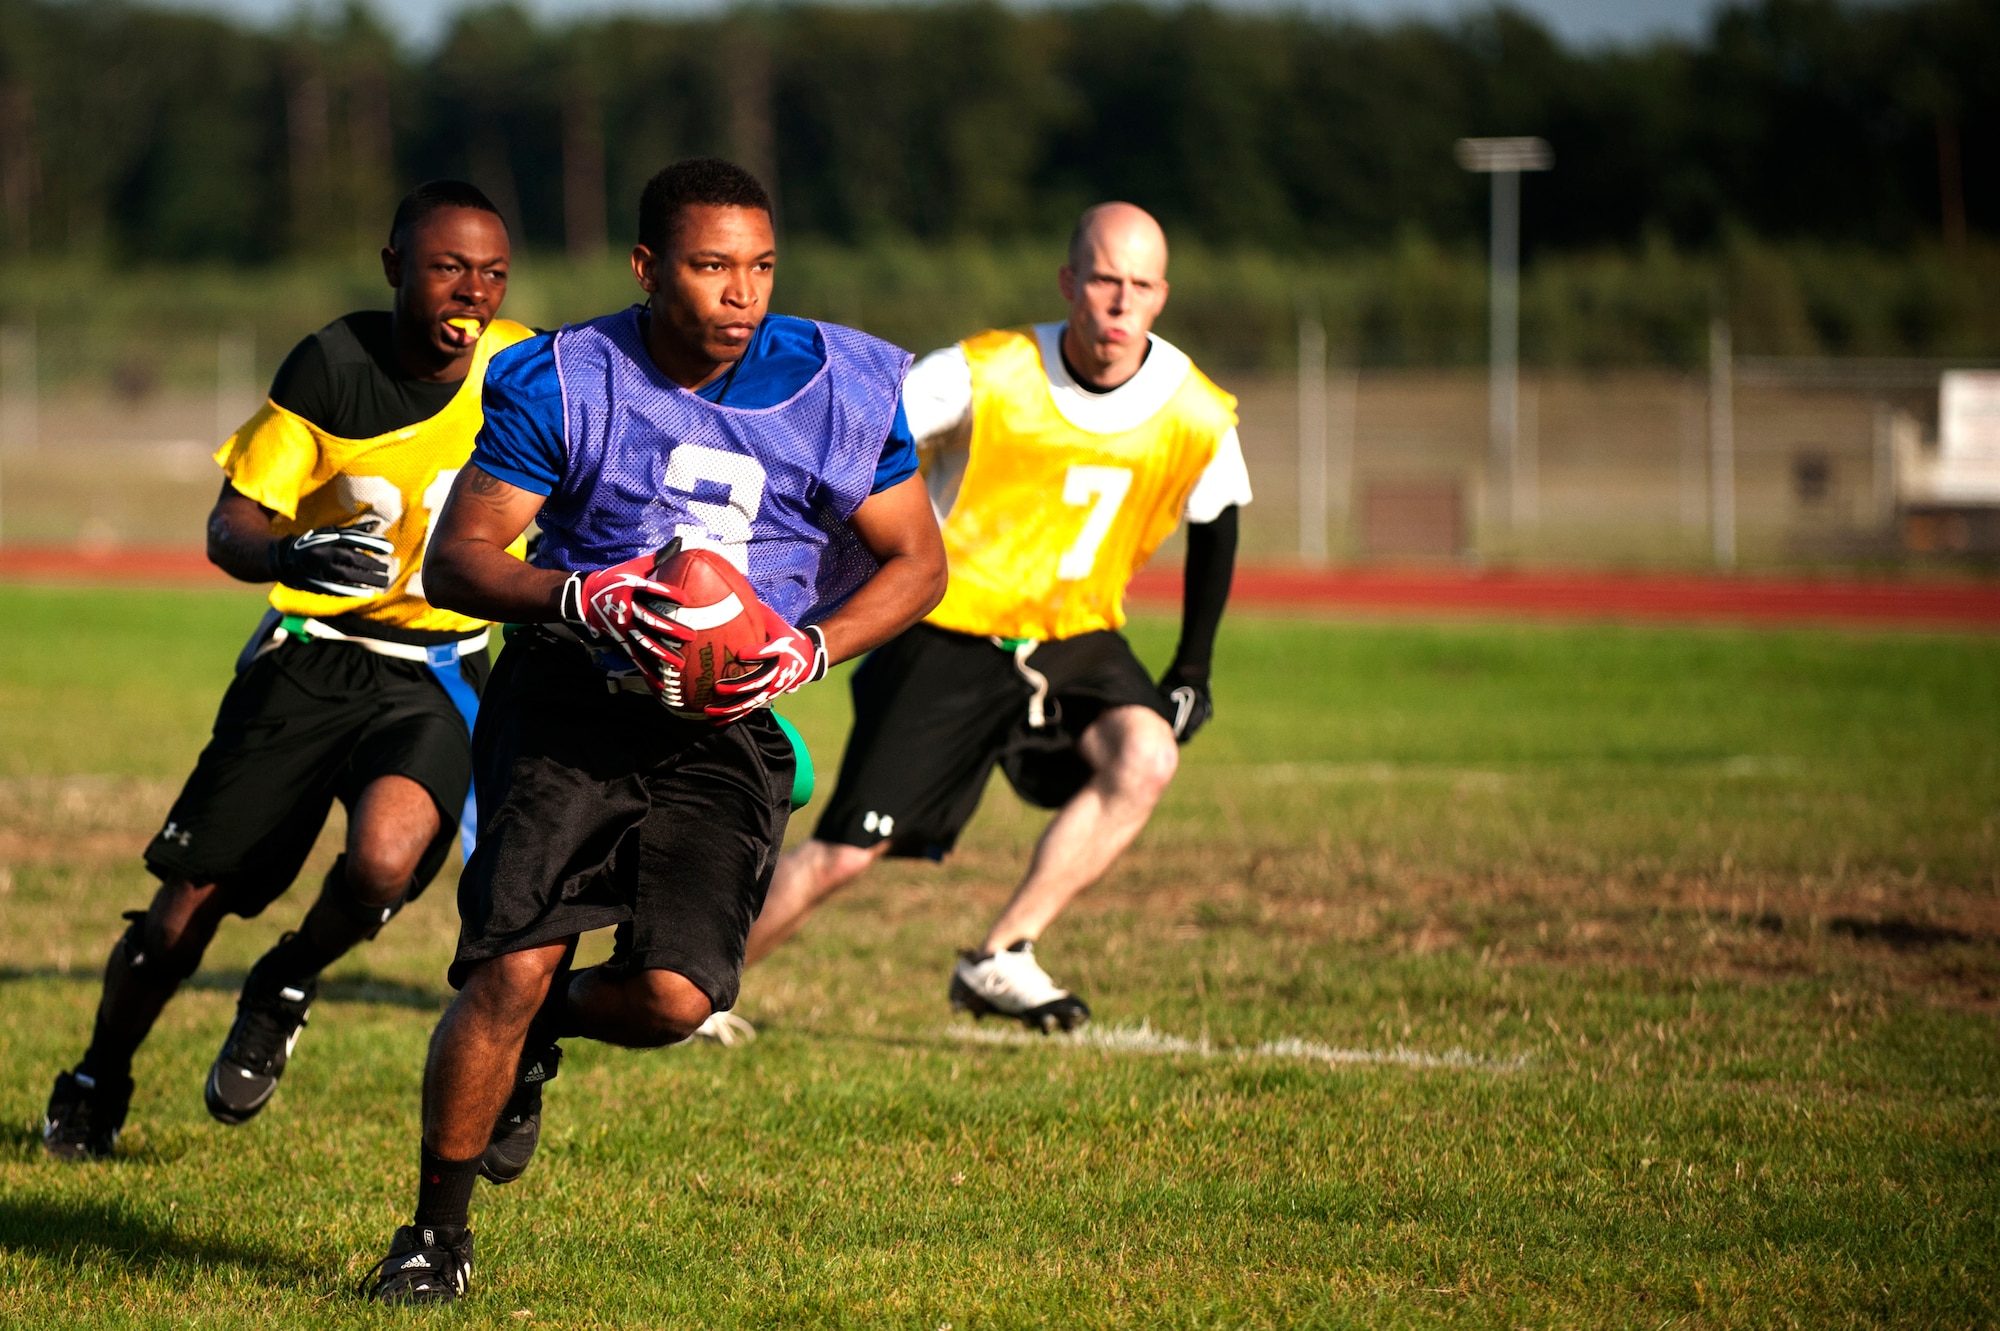 SPANGDAHLEM AIR BASE, Germany – Donnel Carney, 52nd Logistics Readiness Squadron unit deployment manager, runs down the field during a flag football game near the Skelton Memorial Fitness Center here Sept. 5.  Carney is the first-string quarterback for the 52nd LRS team and scored one touchdown during their first game of the season.  The flag football season will continue until Oct. 31, thereafter the top eight teams will compete for the base championship title in a single elimination tournament. (U.S. Air Force photo by Airman 1st Class Gustavo Castillo/Released)